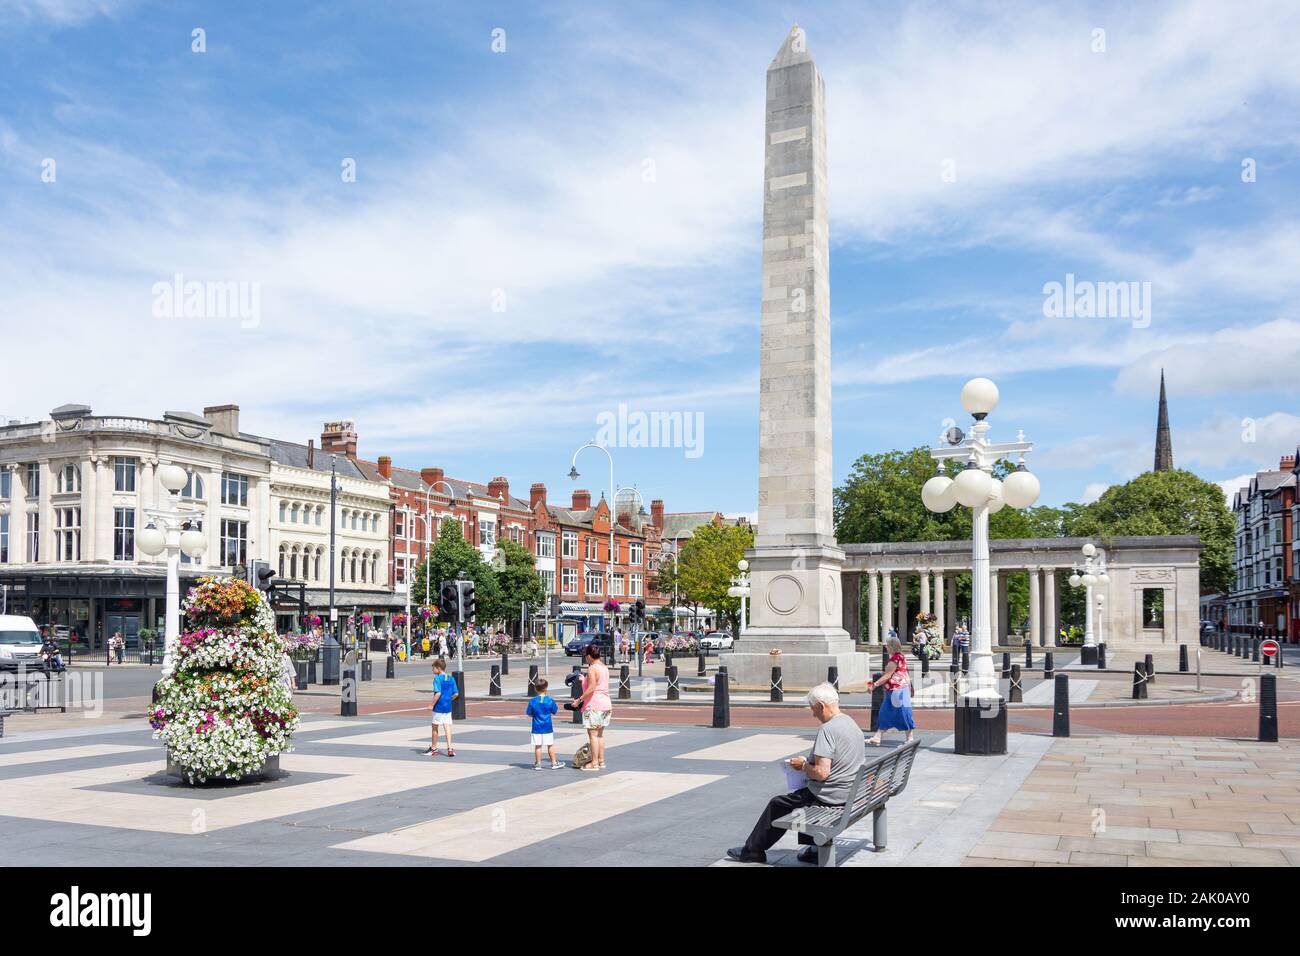 The Monument, London Square. Lord Street, Southport, Merseyside, England, United Kingdom Stock Photo